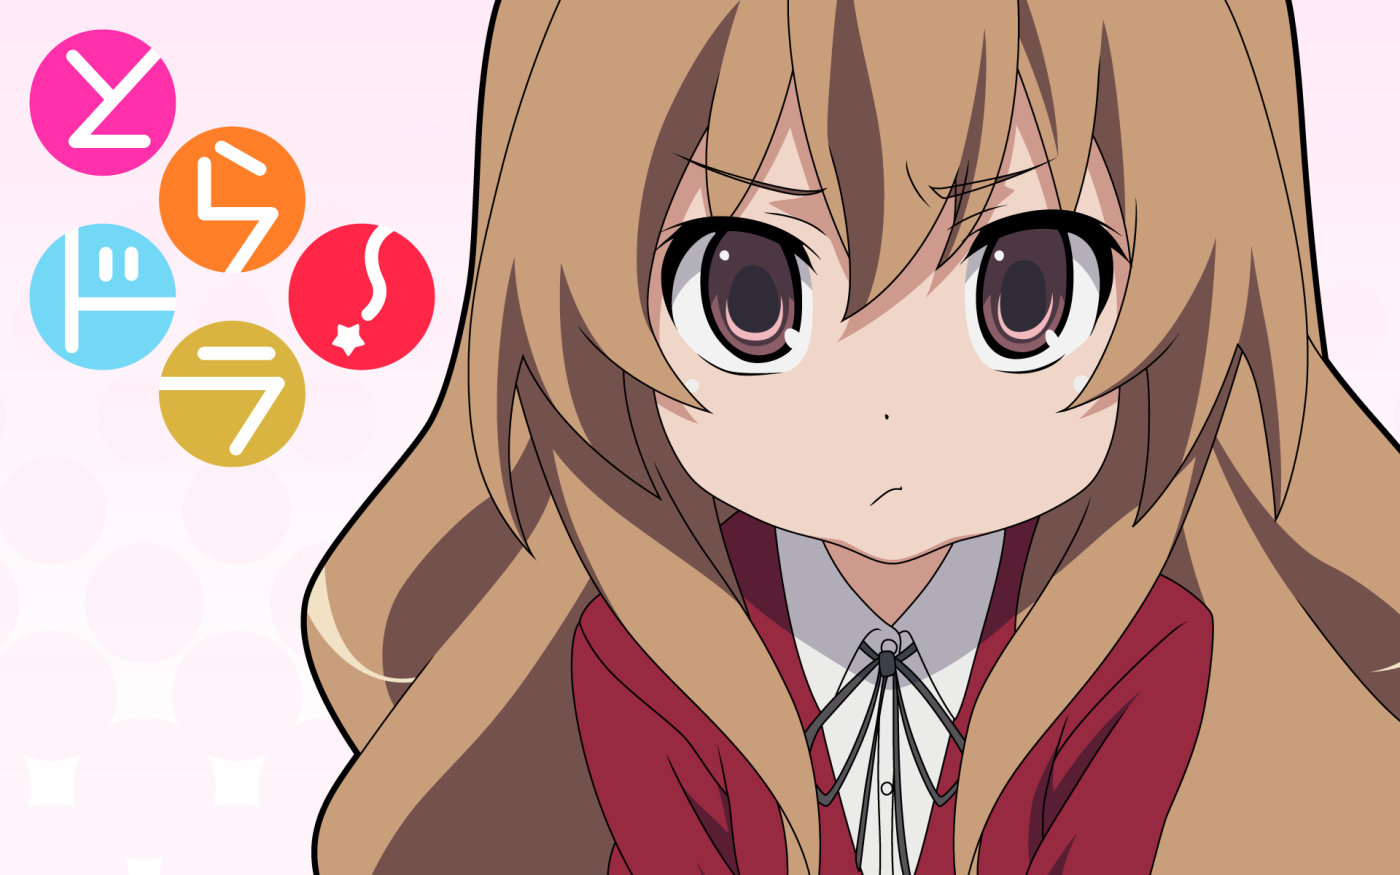 Toradora!: anime review – It's not just love…it's life